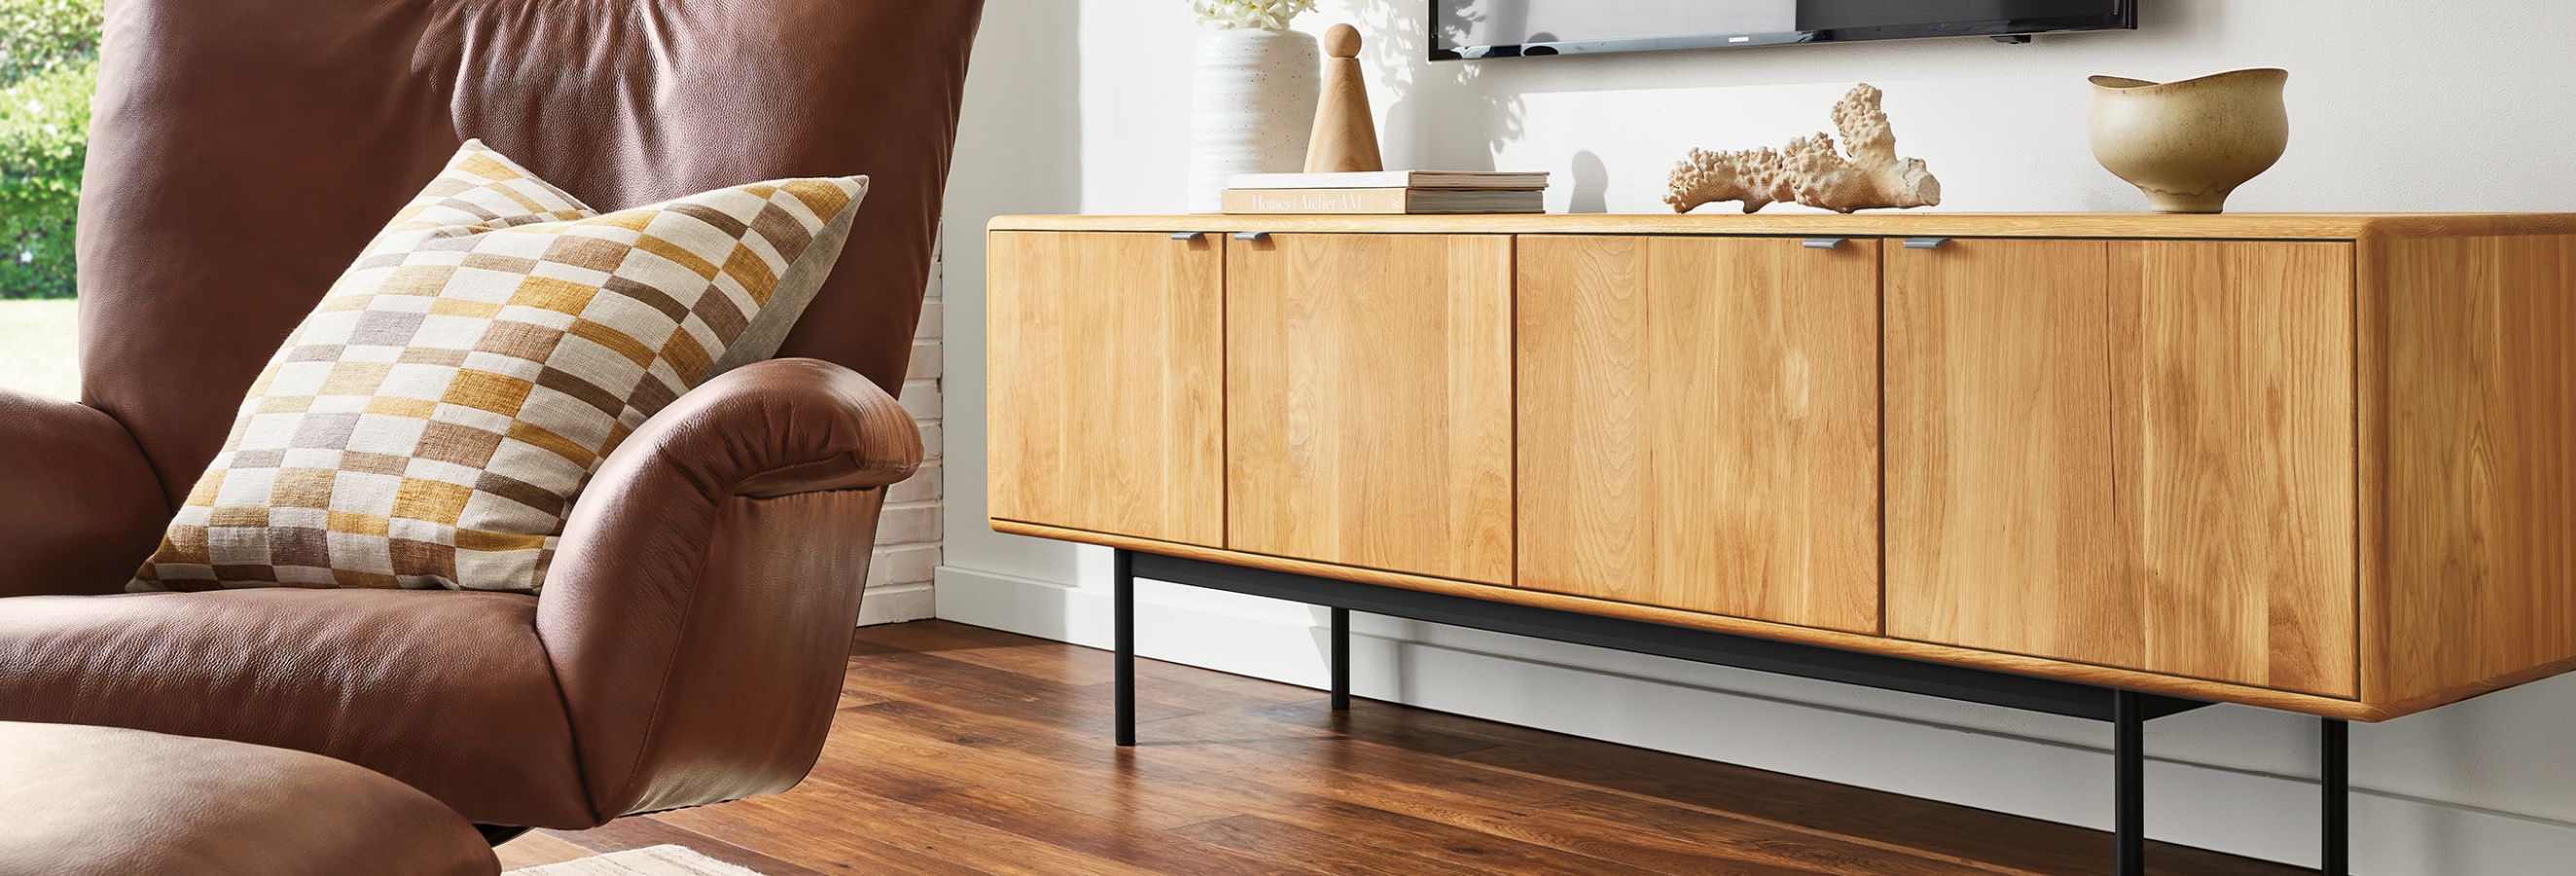 https://rnb.scene7.com/is/image/roomandboard/category_storage_subcat01?size=2400,2400&scl=1